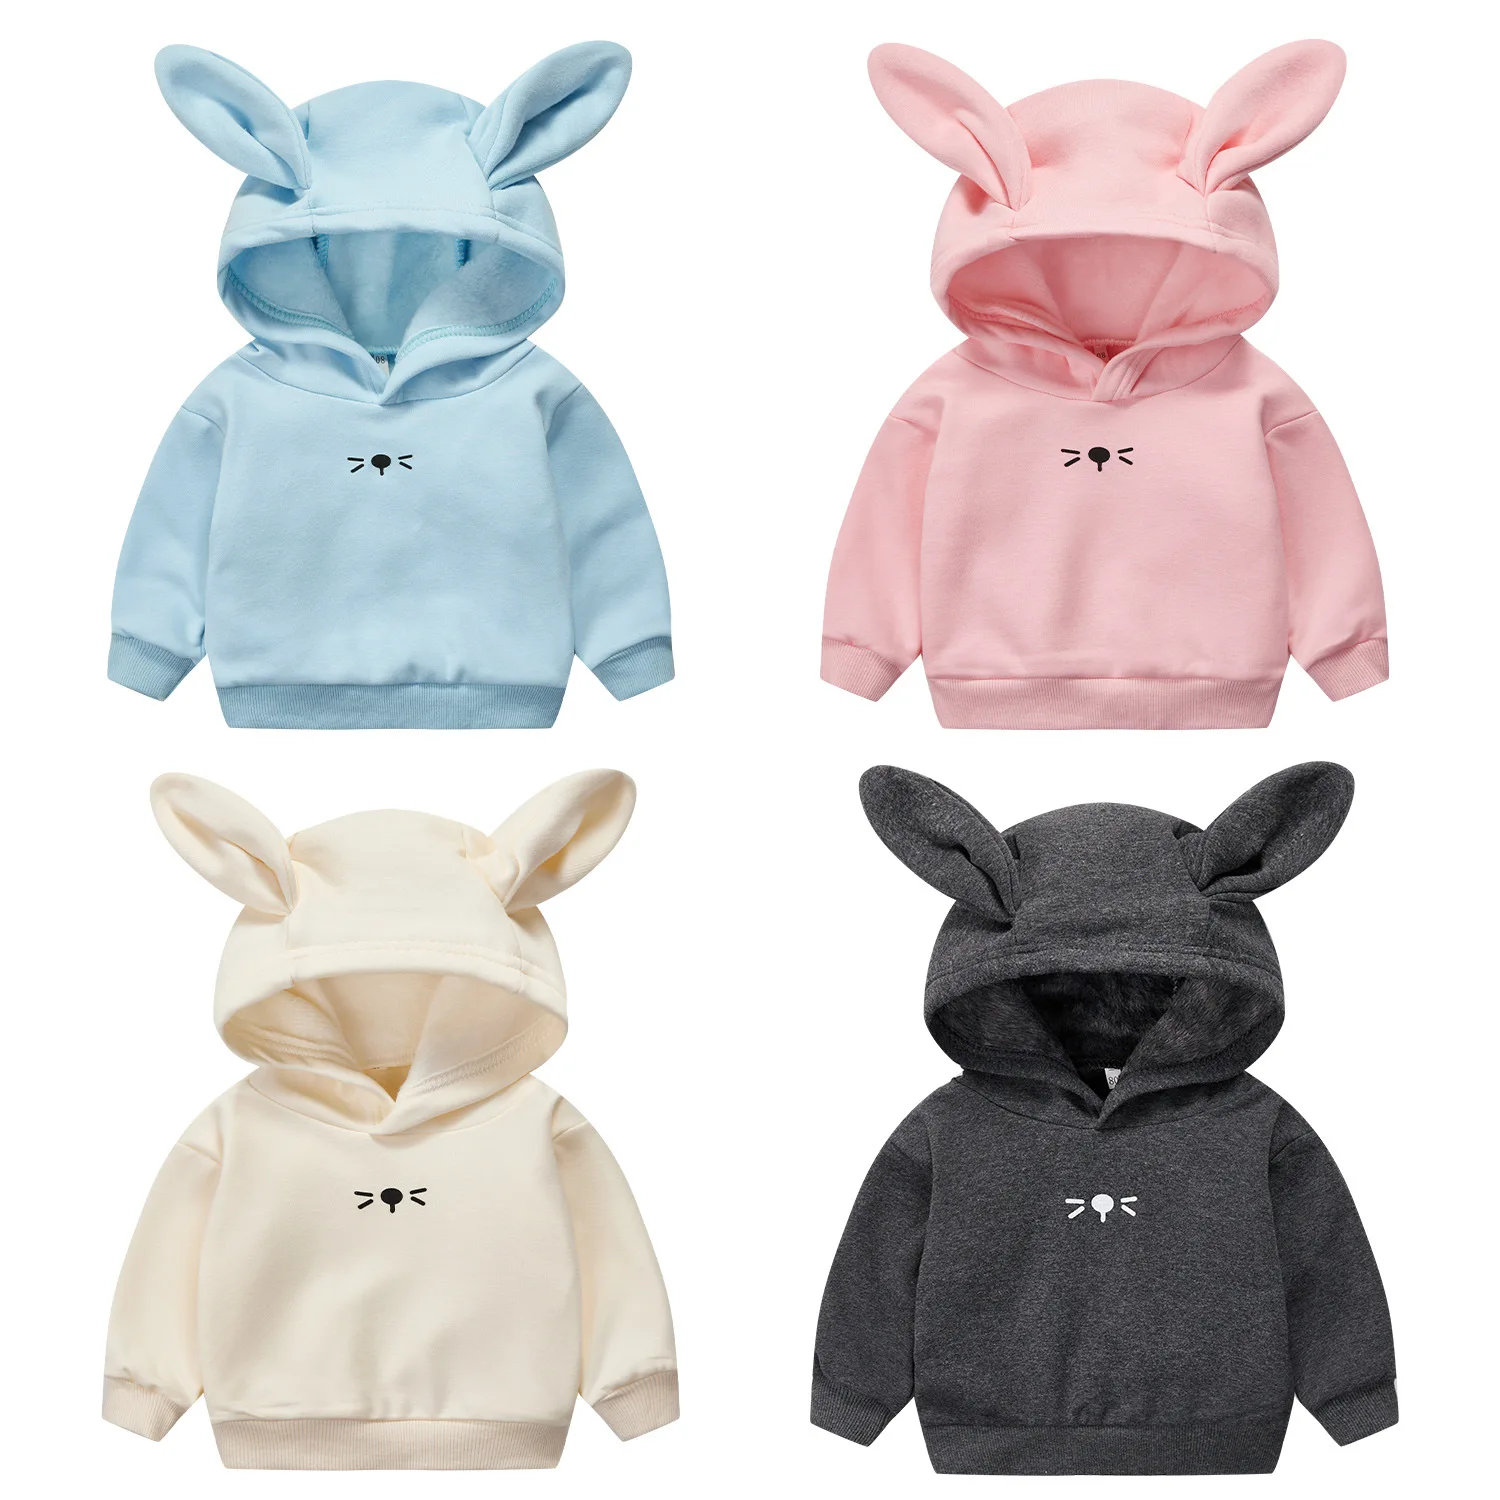 Autumn Hoodies Cute Cotton Thin Top Baby Clothing for1-4y One Pcs Sale Cheap Children's Clothes Boys and Girls T-shirts Spring